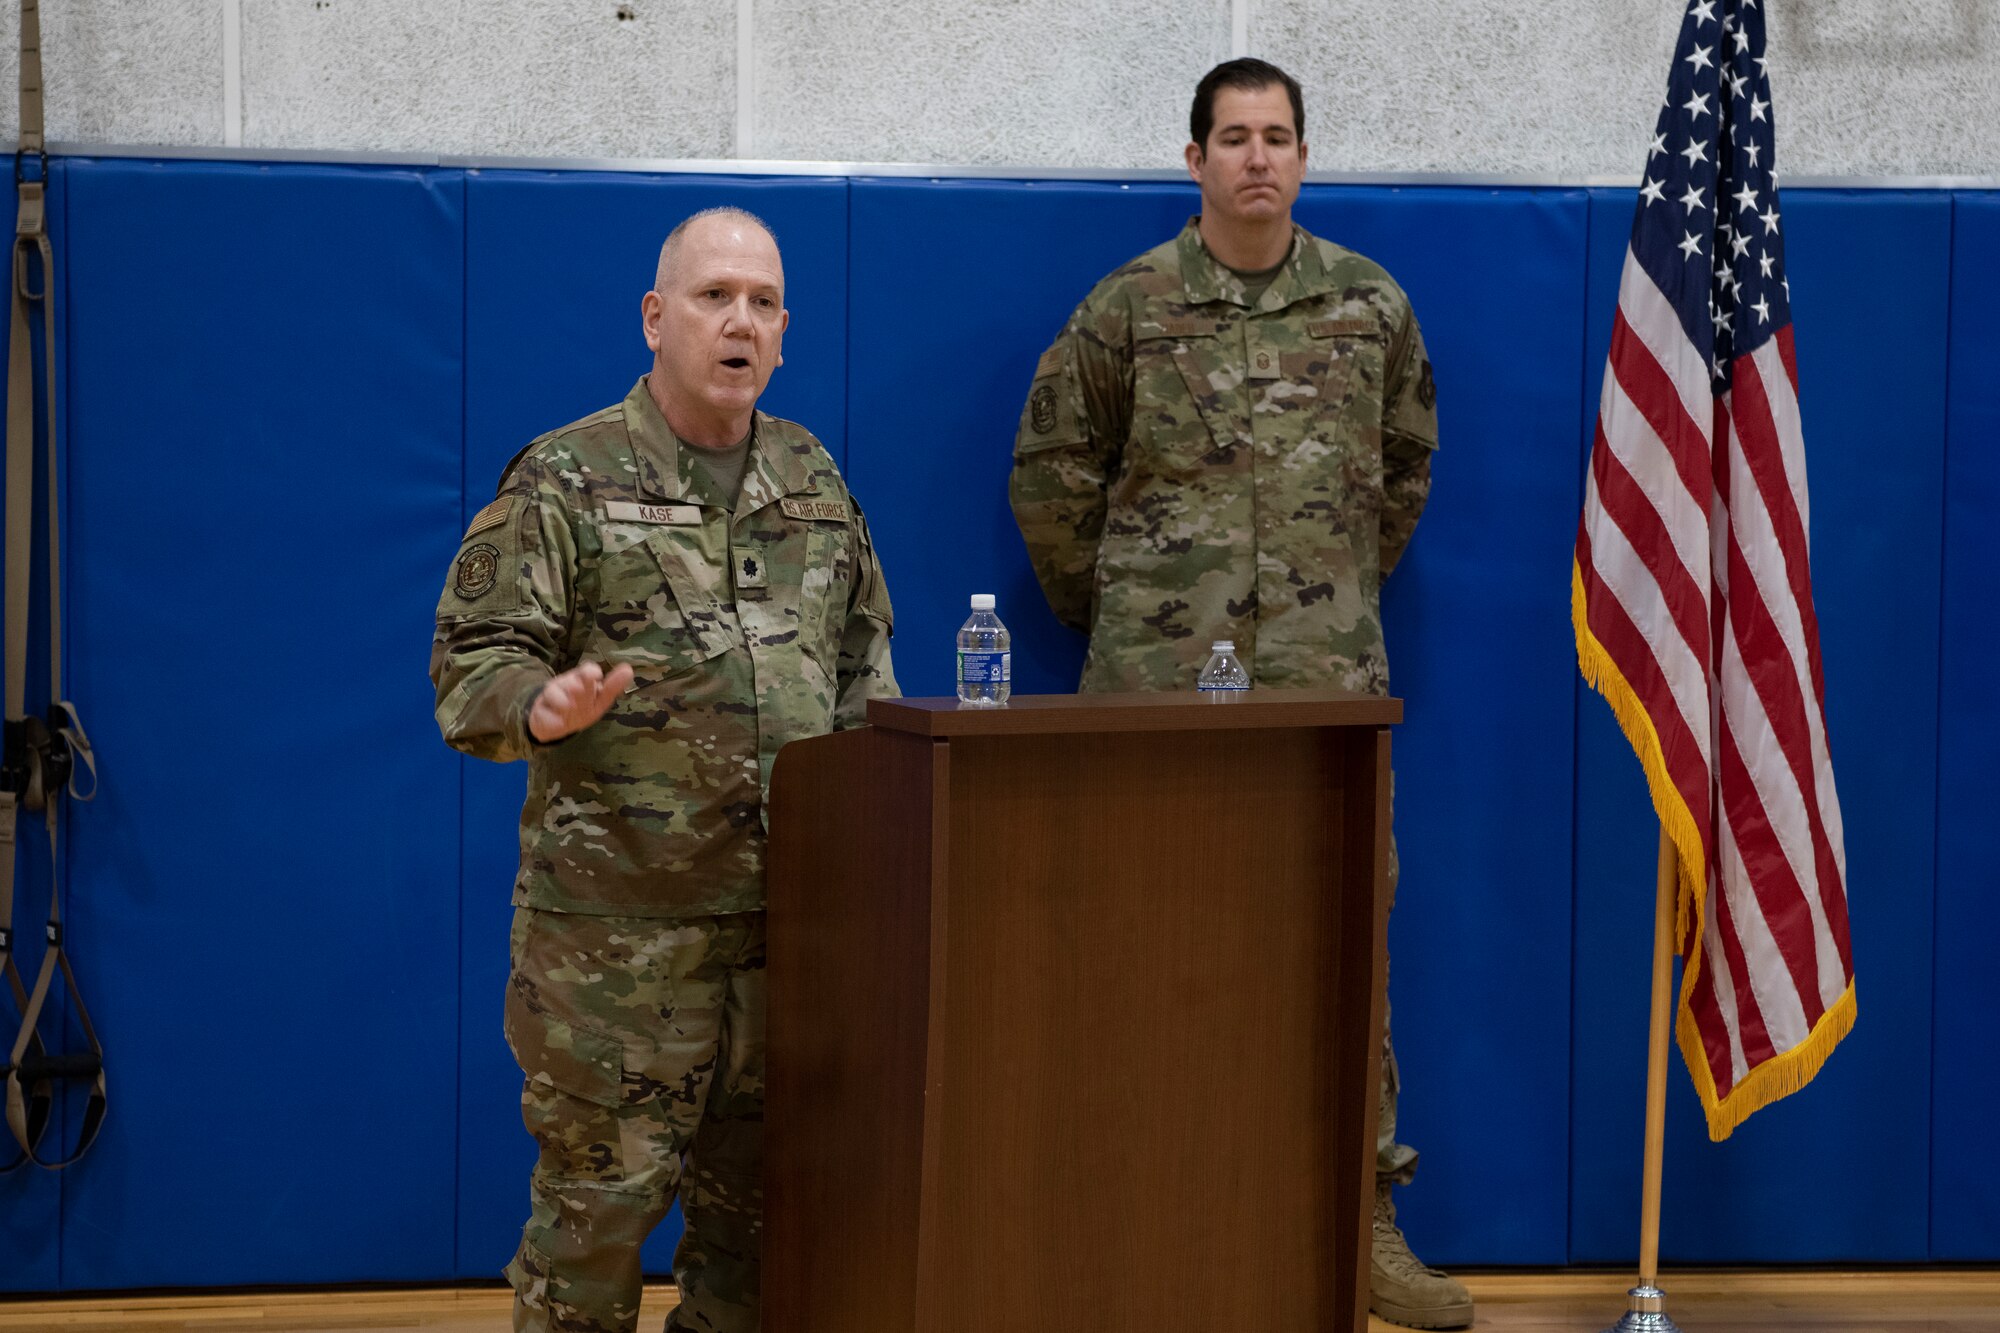 Lt. Col. Eric Kase, 434th Force Support Squadron commander, speaks during an assumption of command ceremony at Grissom Air Reserve Base, Ind., Dec. 5, 2020. Kase assumed command of the 434th FSS during the ceremony. (U.S. Air Force photo by Staff Sgt. Michael Hunsaker)